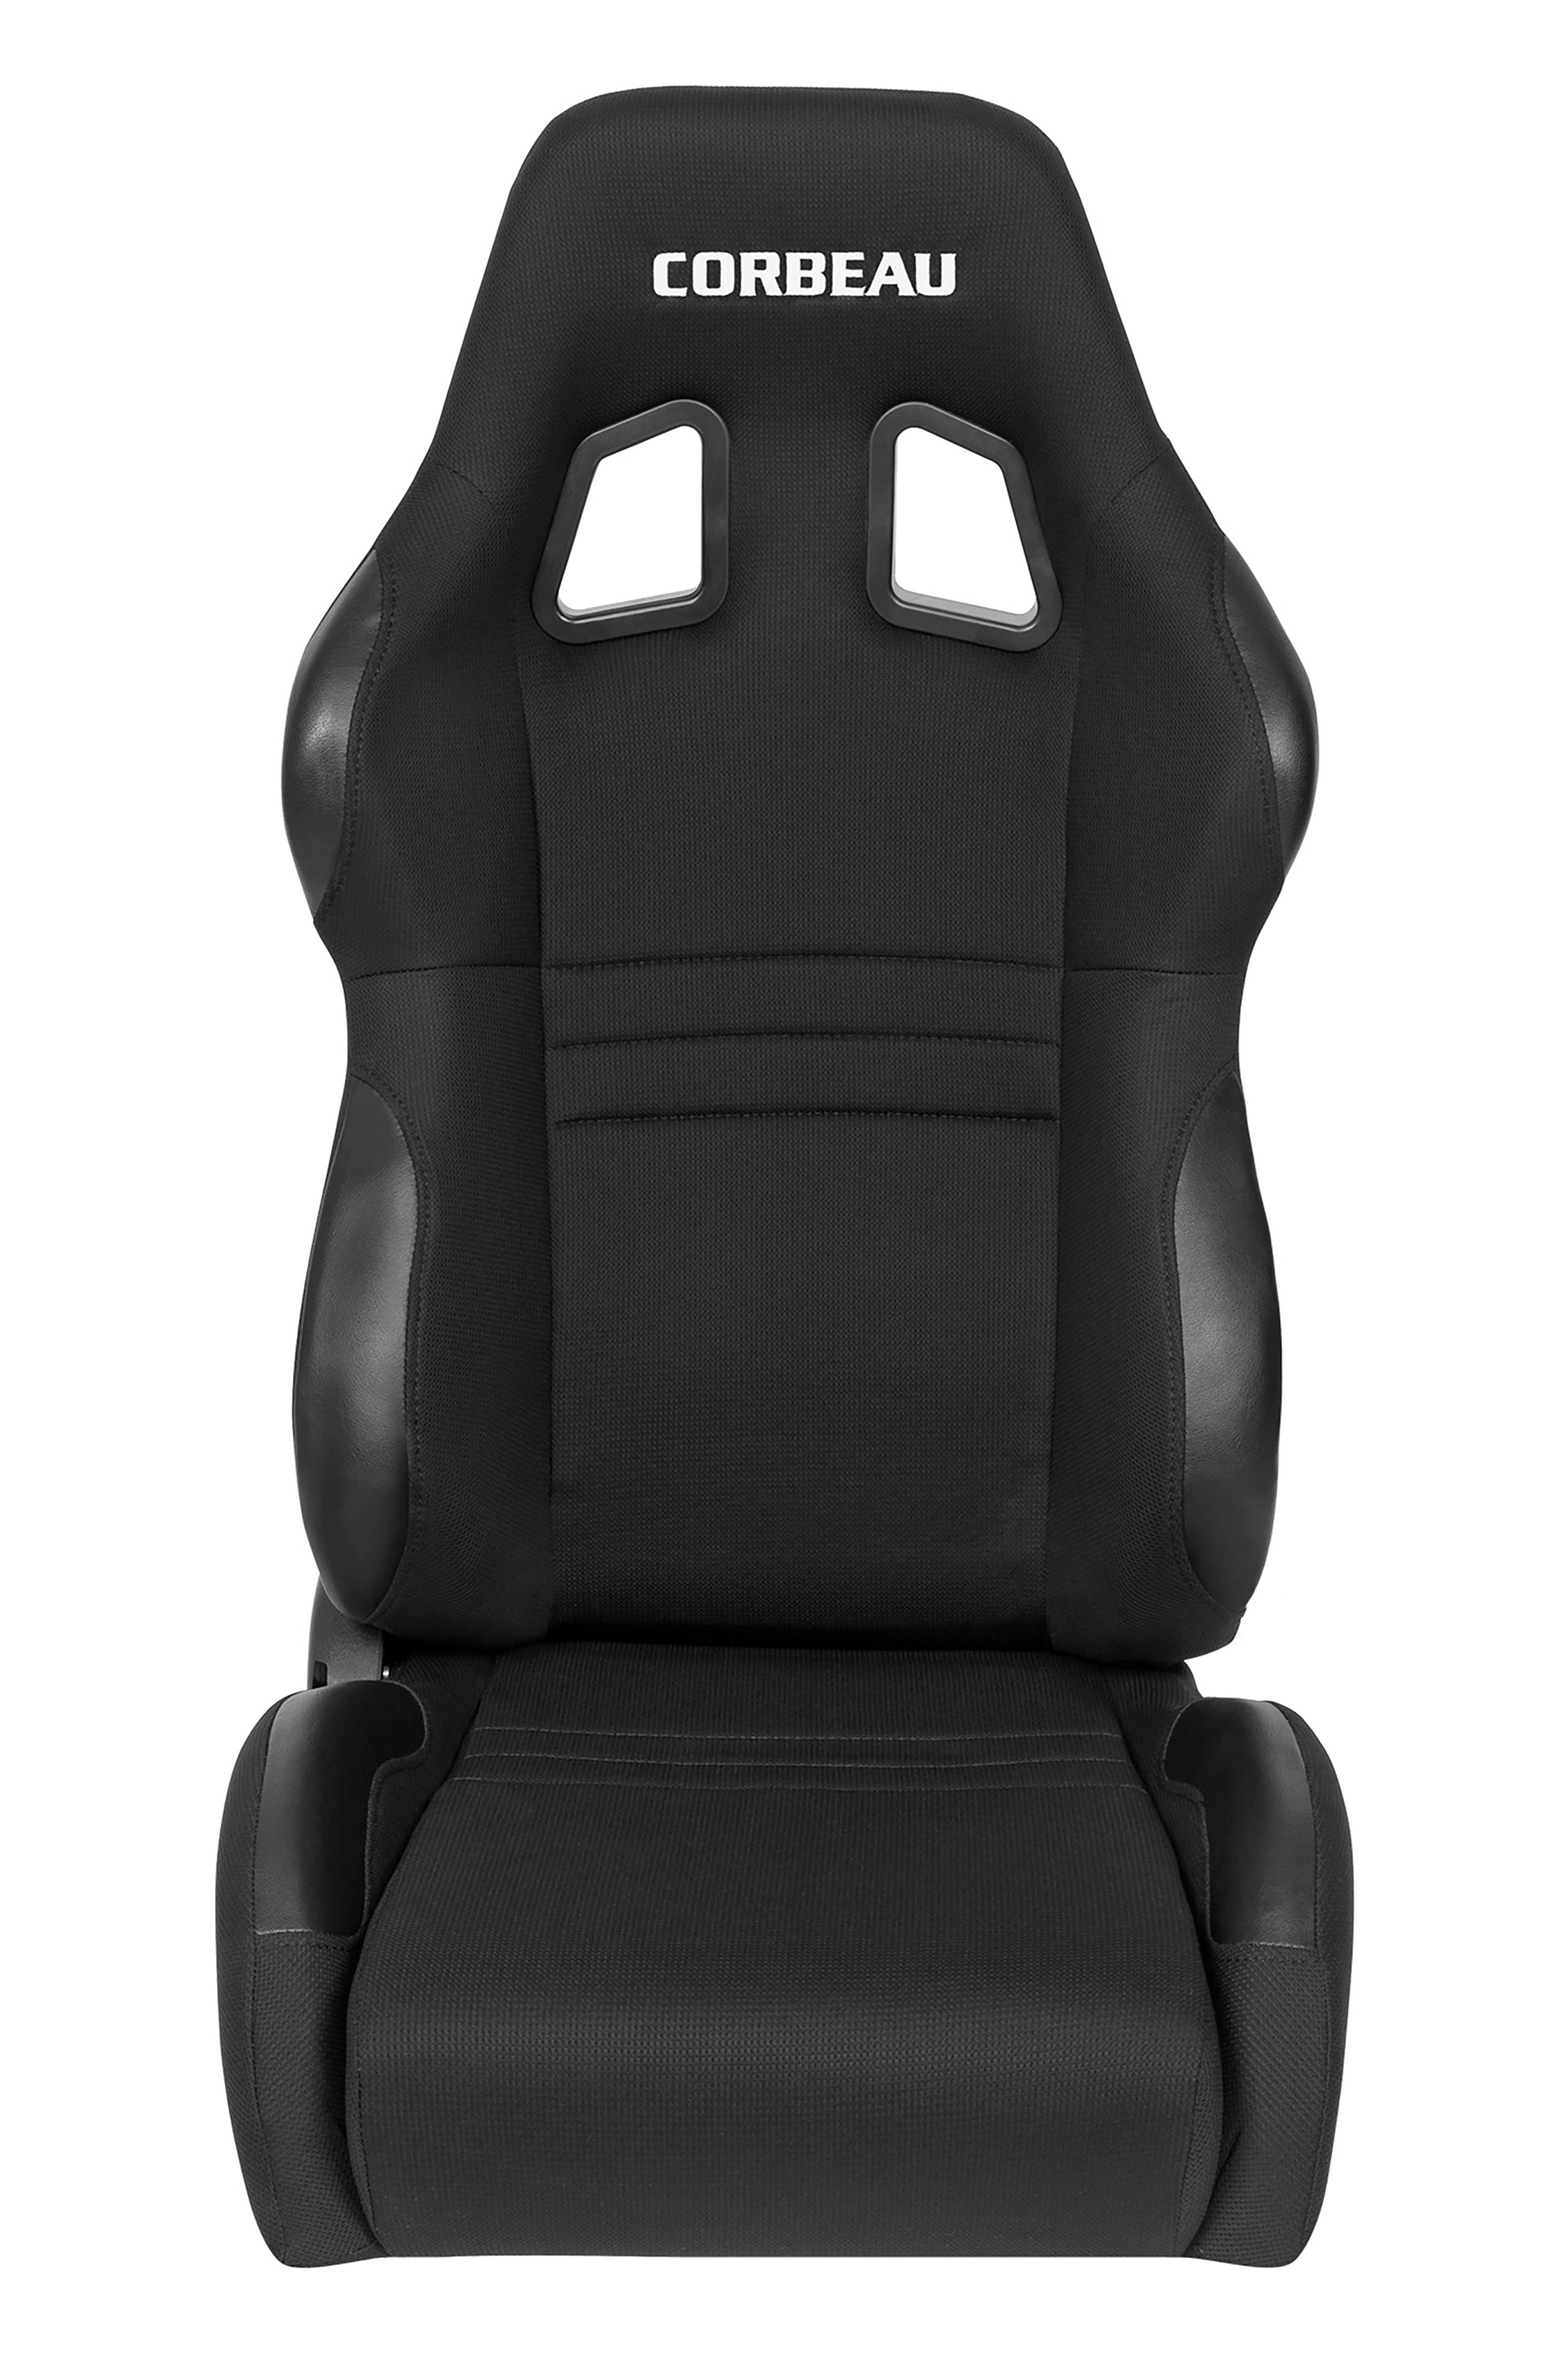 1963-2019 Chevrolet Corvette A4 Standard Width Seat Set With Tracks In Cloth, Leather, Or Microsuede - Corbeau Seats